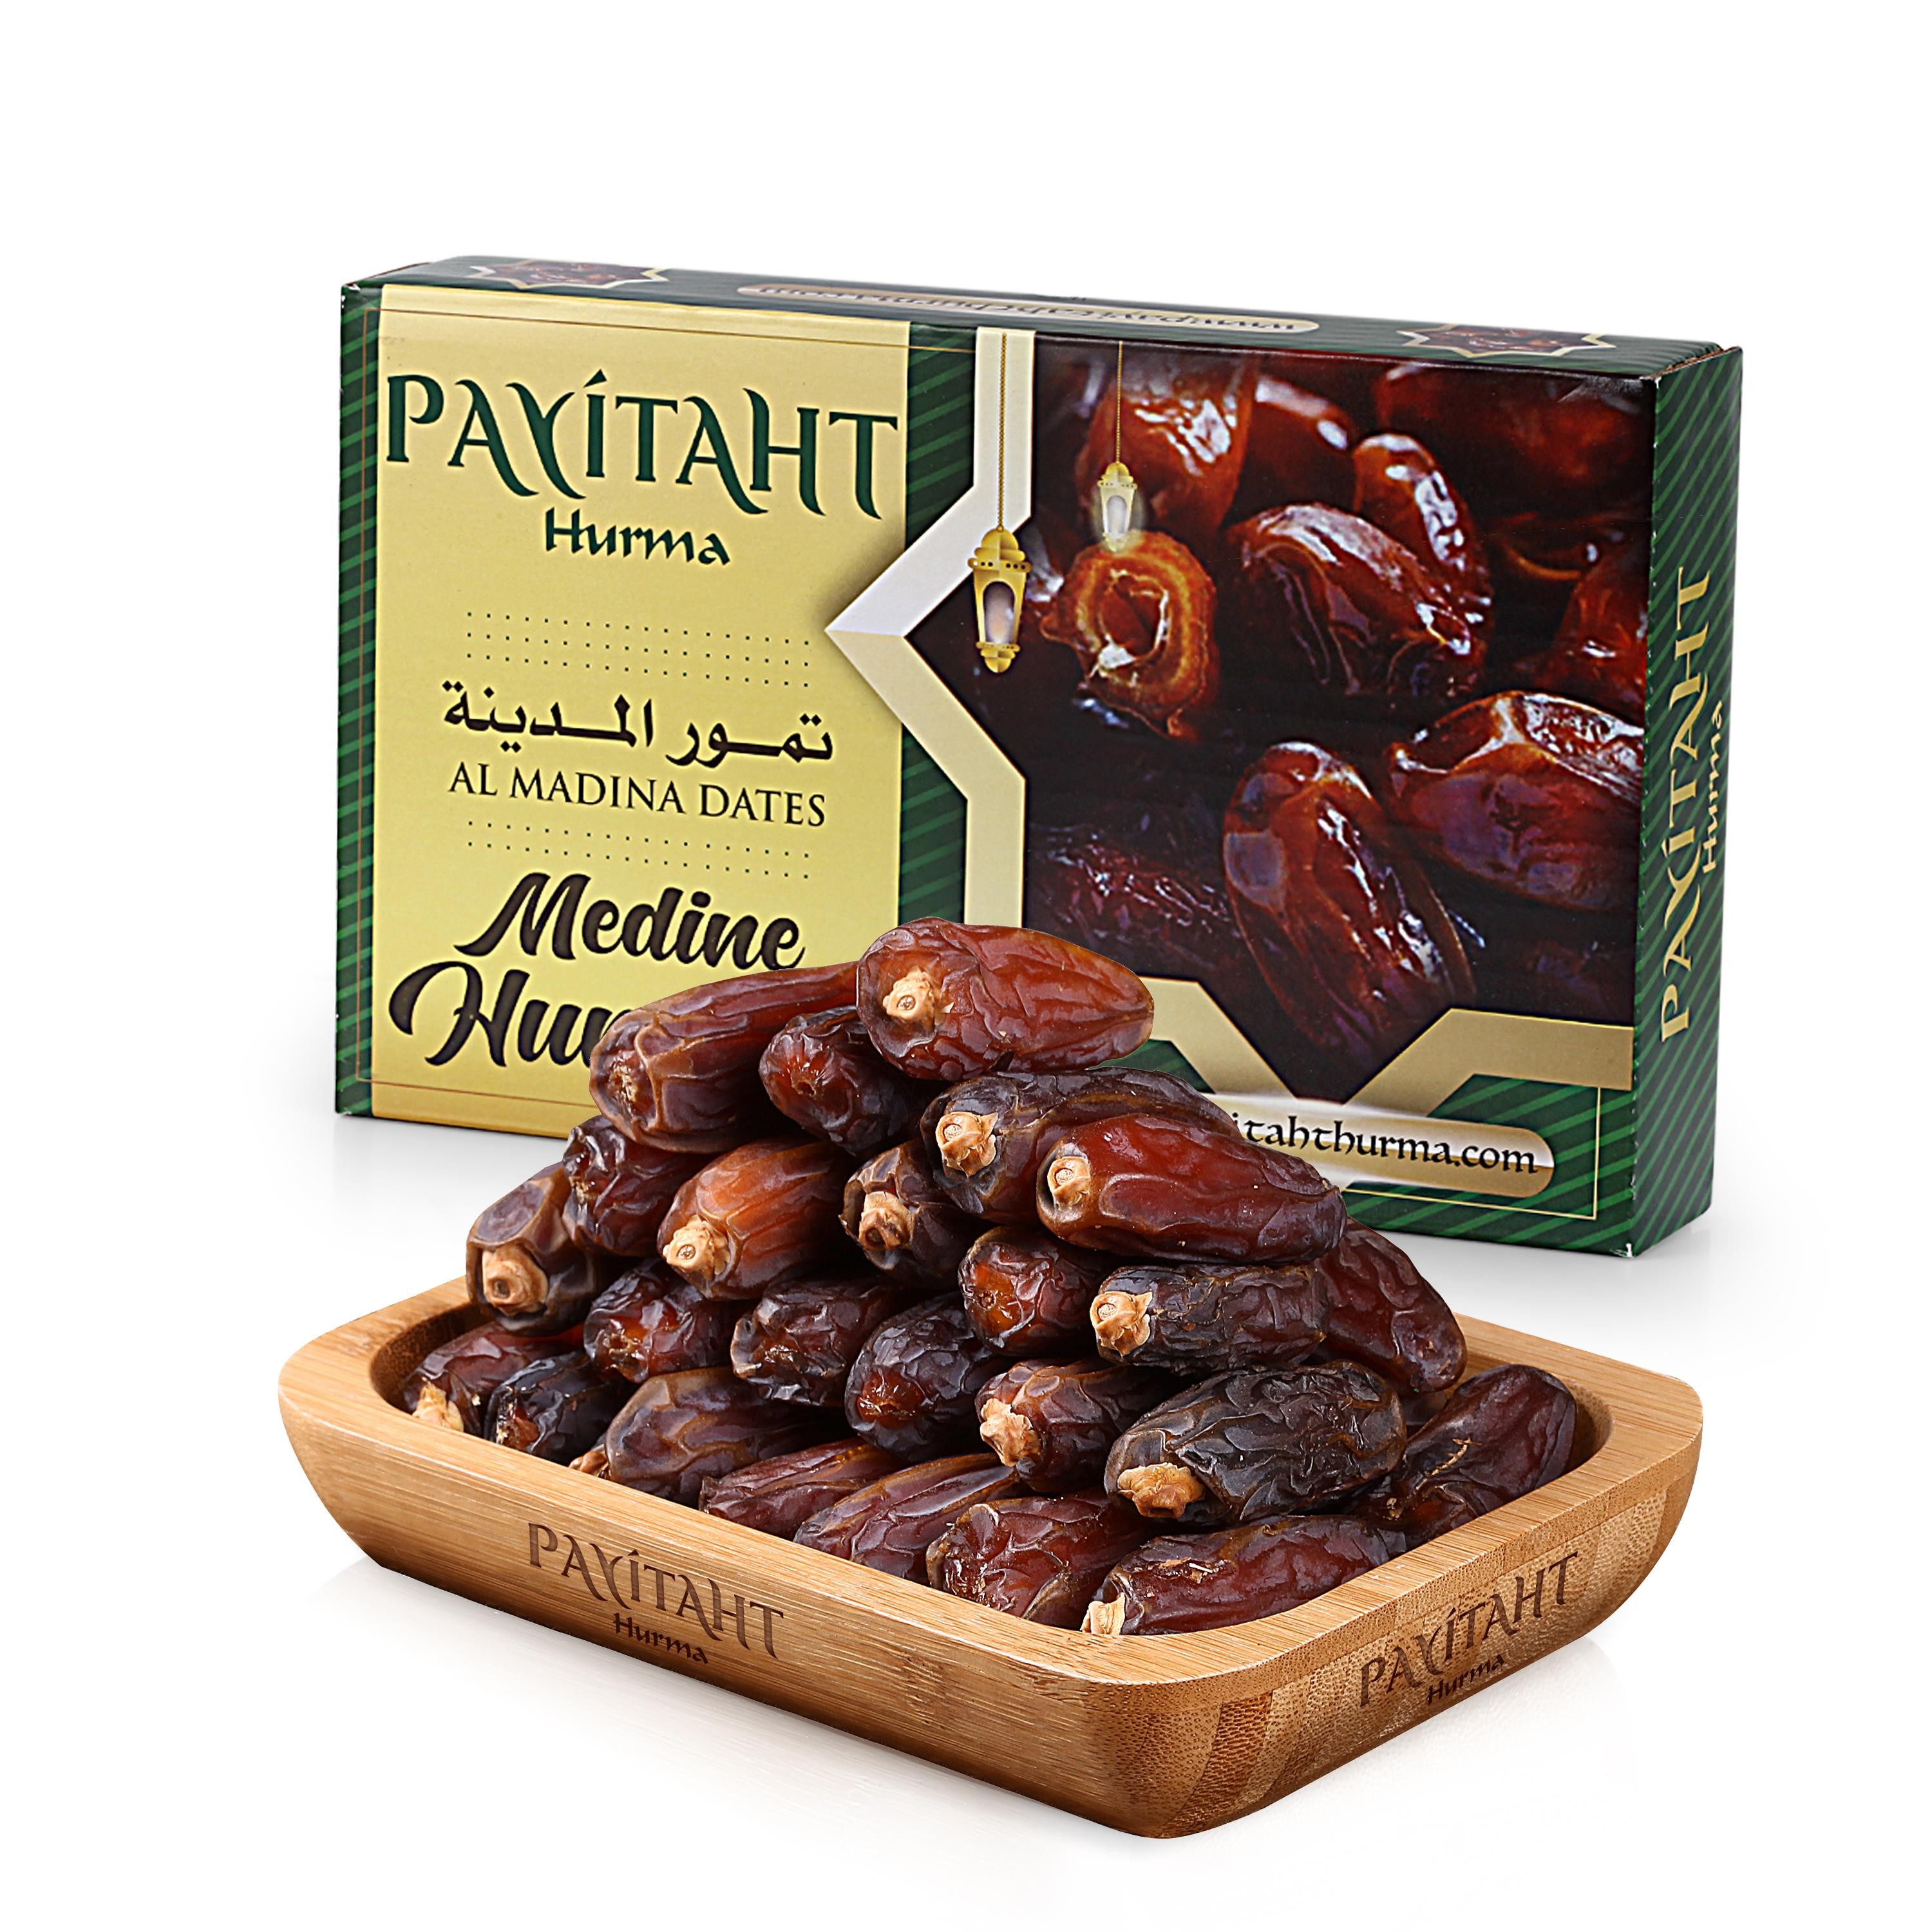 PAYİTAHT DATES MEDINA MEBRUM HASHAB DOUBLE DATES NEW CROP 1 KG PACKAGE